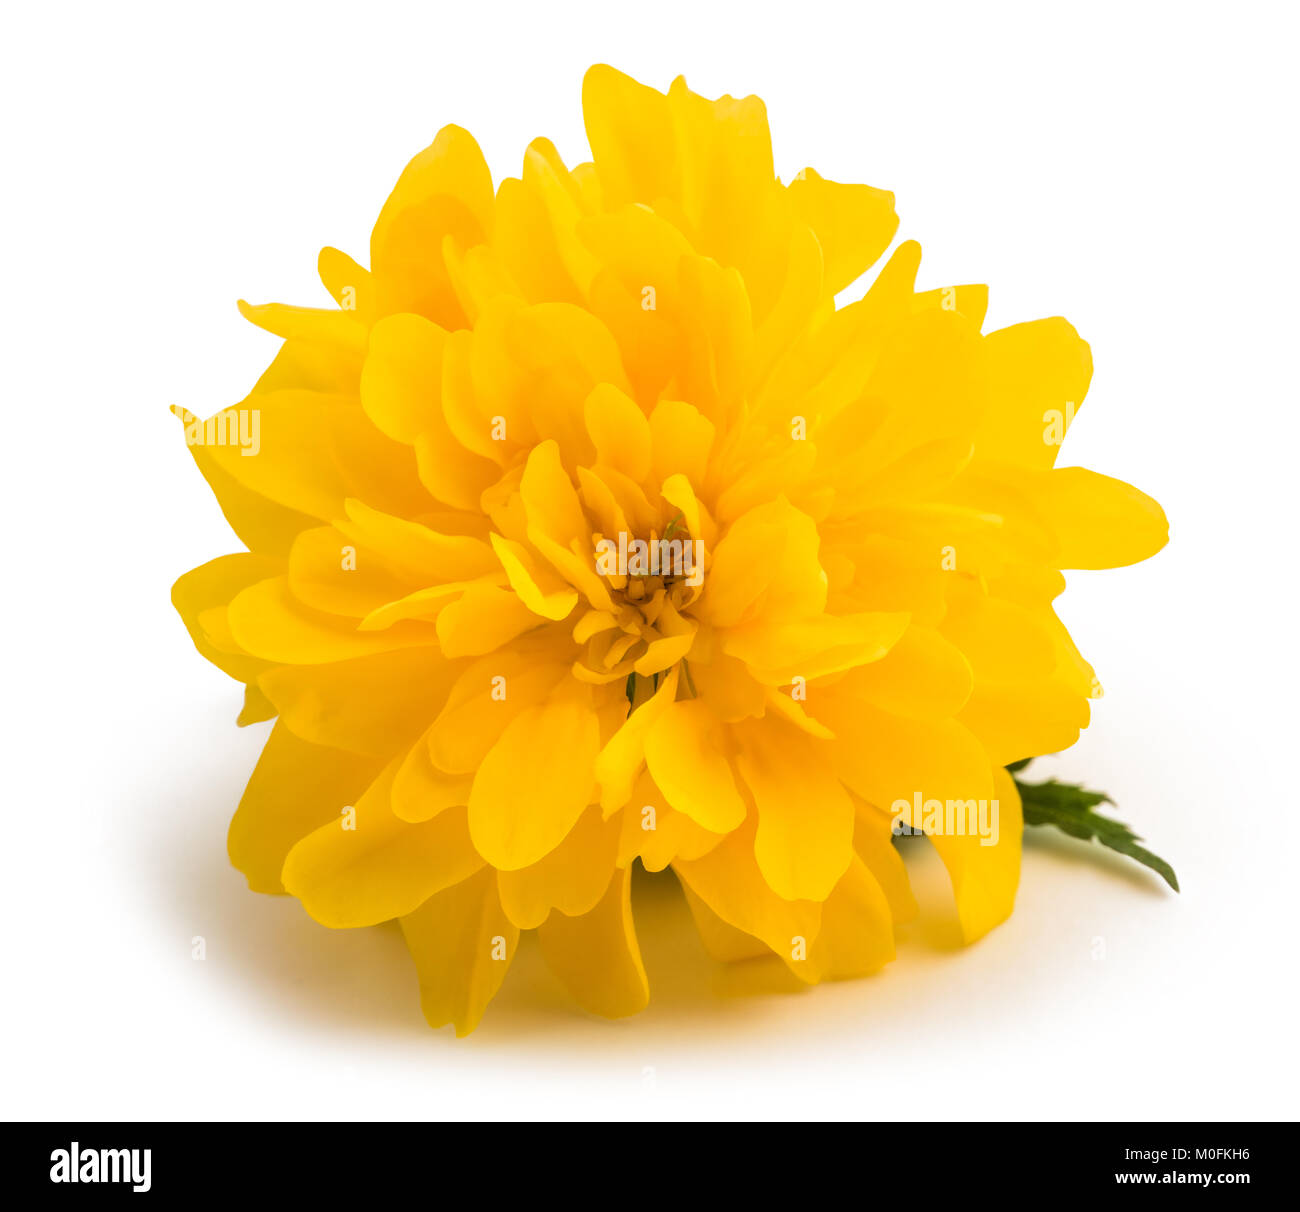 Kerria (Kerria japonica) flower isolated on white background Stock Photo